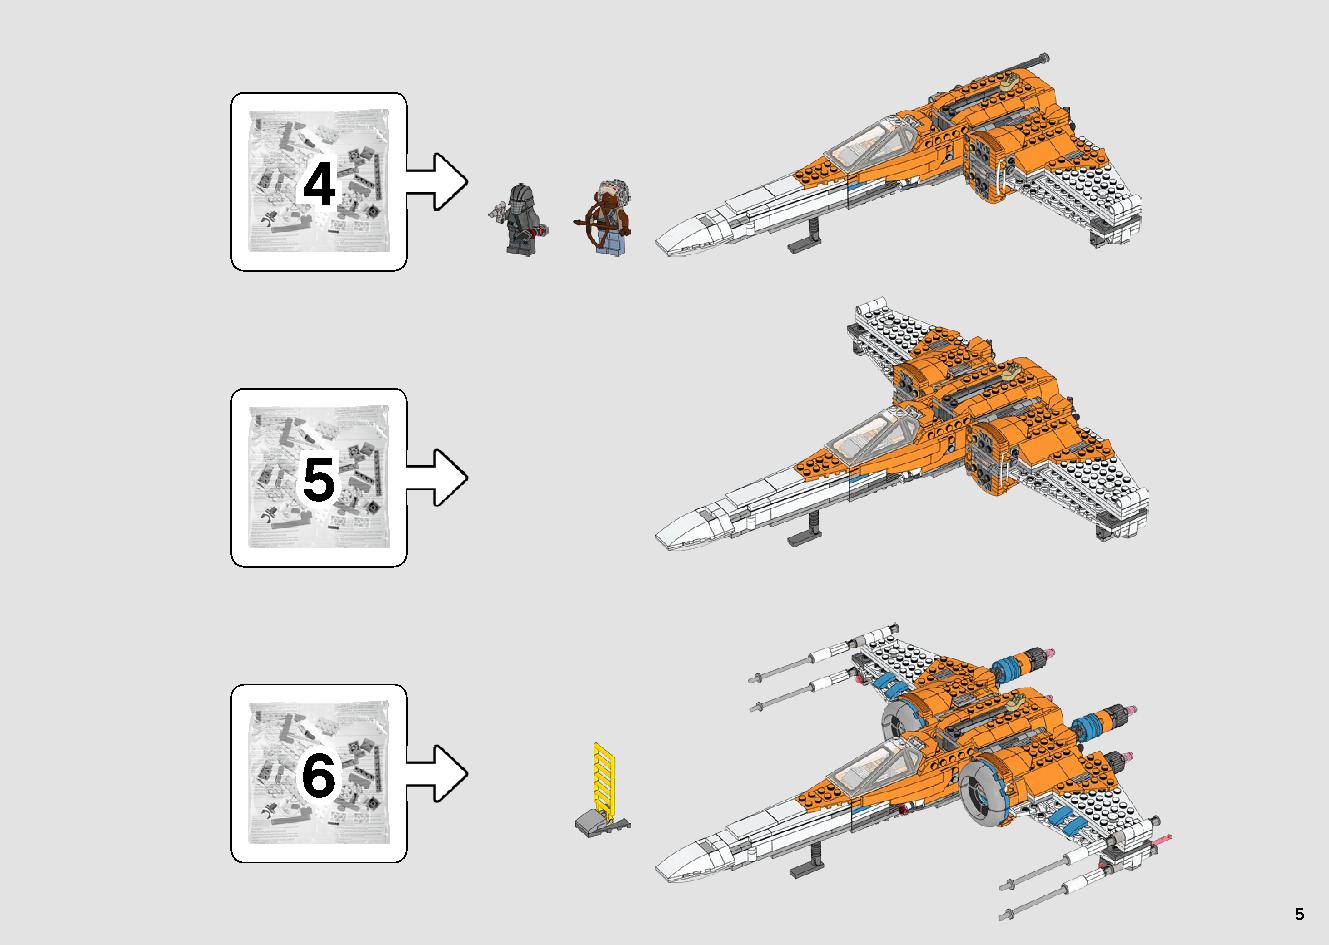 Poe Dameron's X-wing Fighter 75273 LEGO information LEGO instructions 5 page